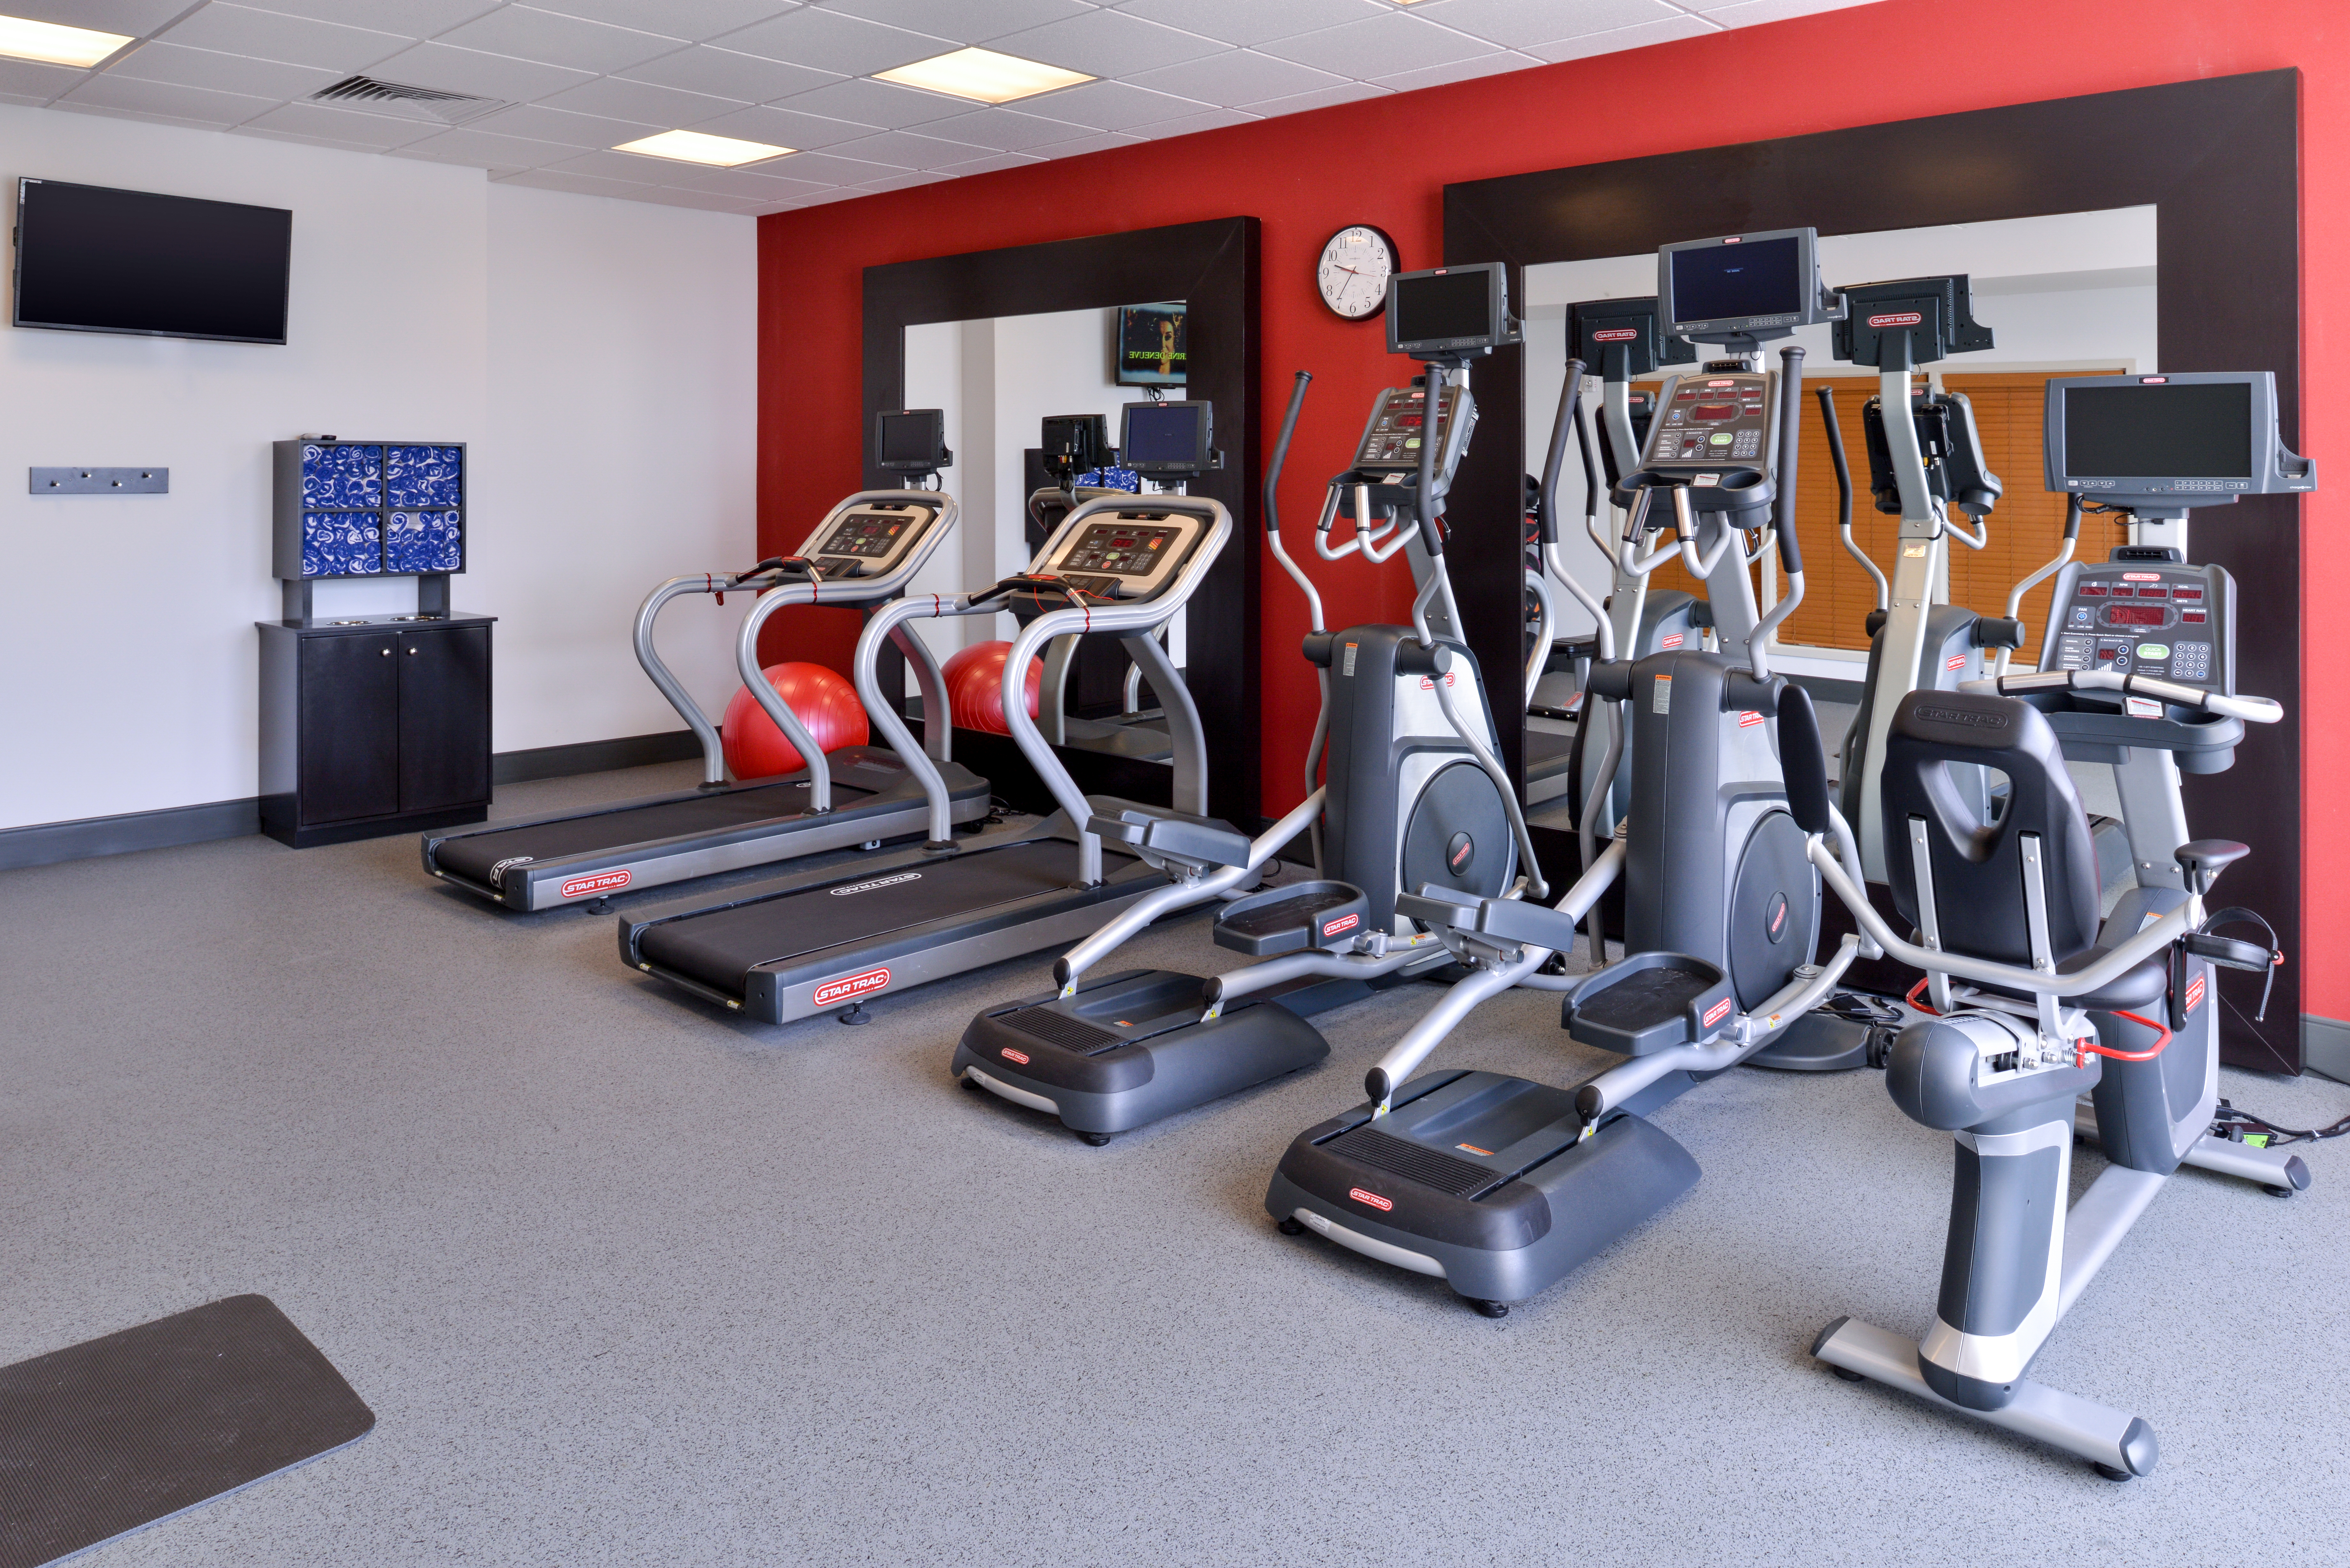 Fitness Center With TV, Red Exercise Ball, and Cardio Equipment in front of Two Large Mirrors